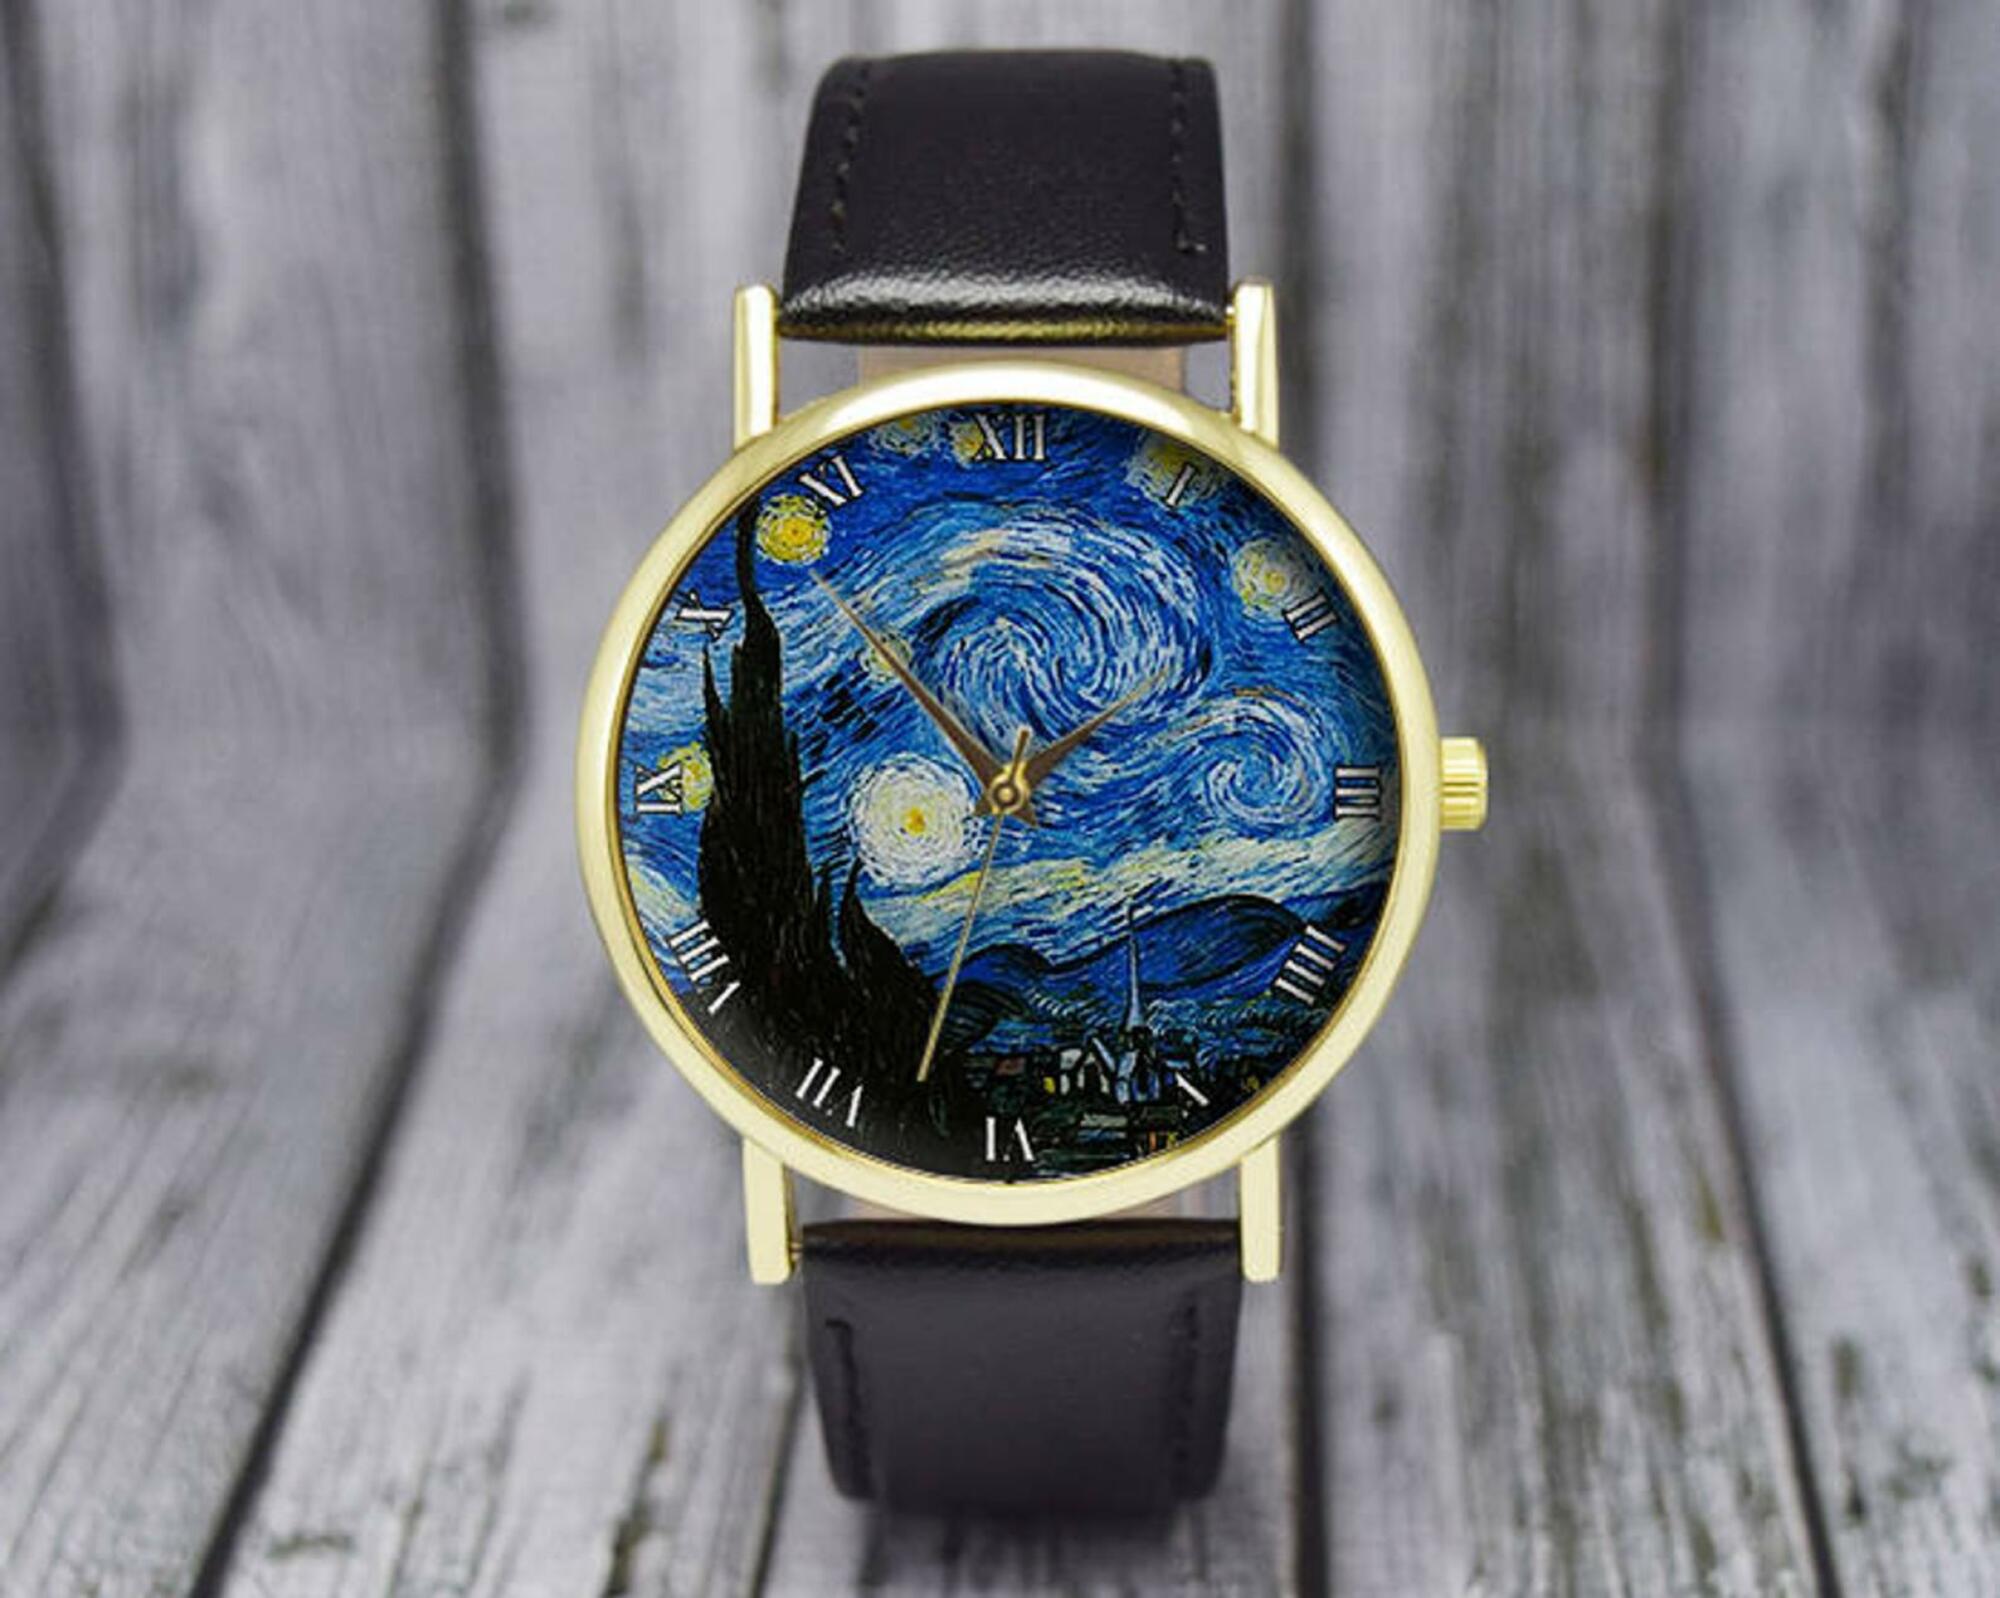 watch with van gogh's starry night on the watch face